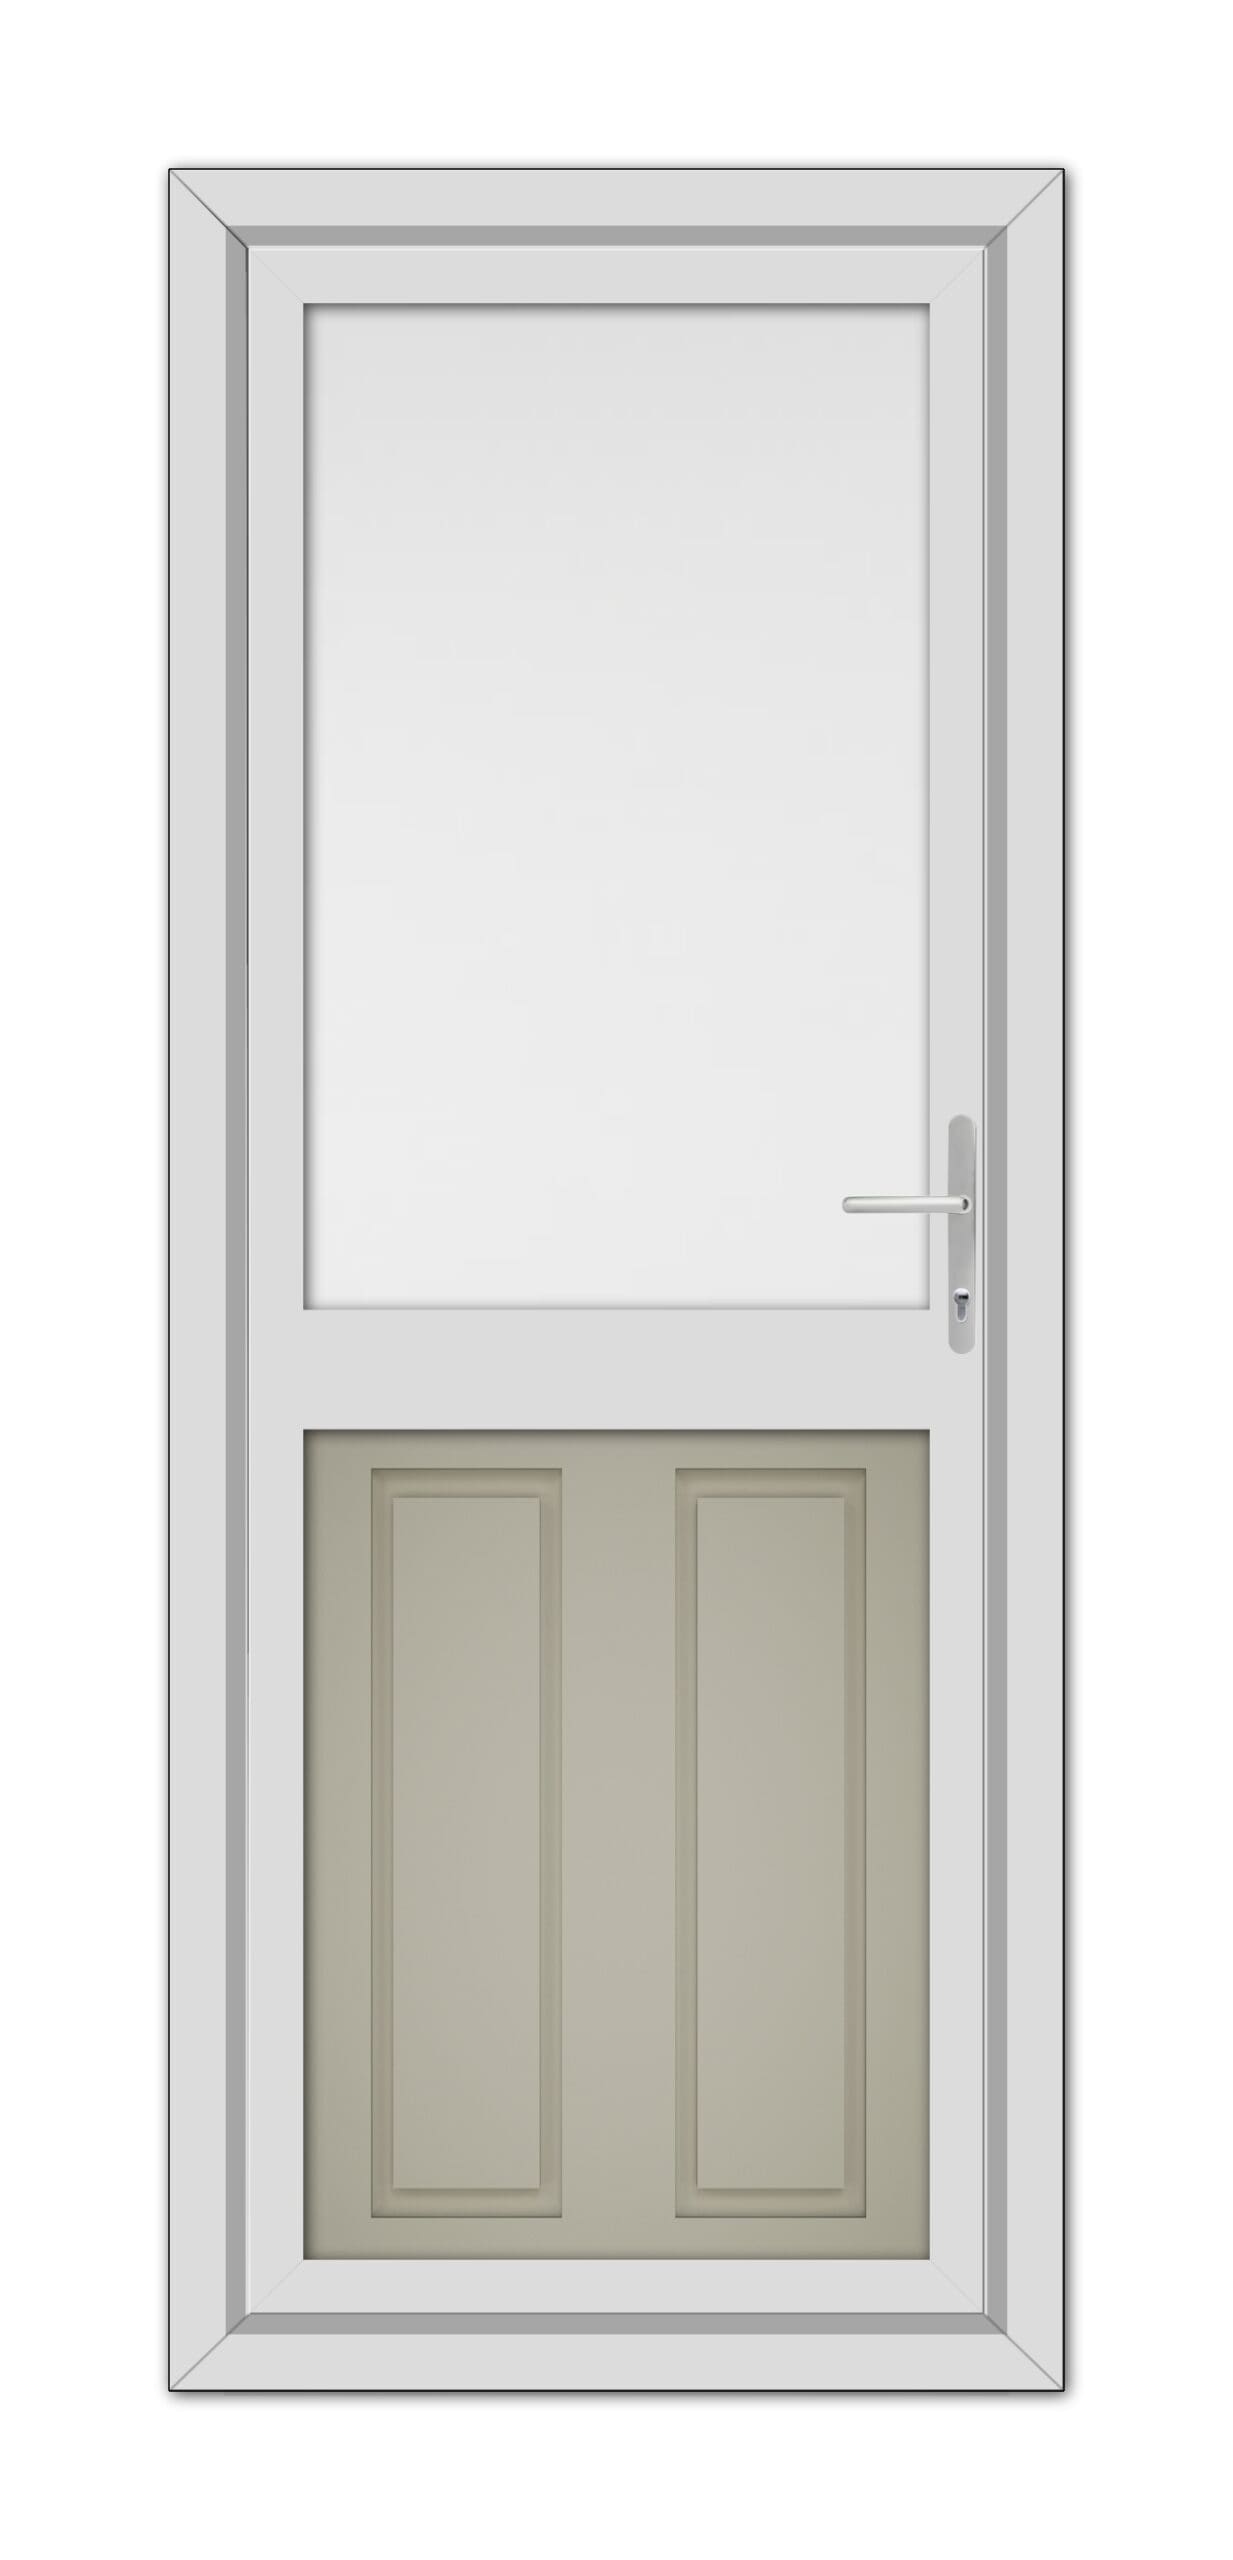 A Pebble Grey Manor Half uPVC Back Door featuring a small upper window and two lower panels, equipped with a modern handle on the right.